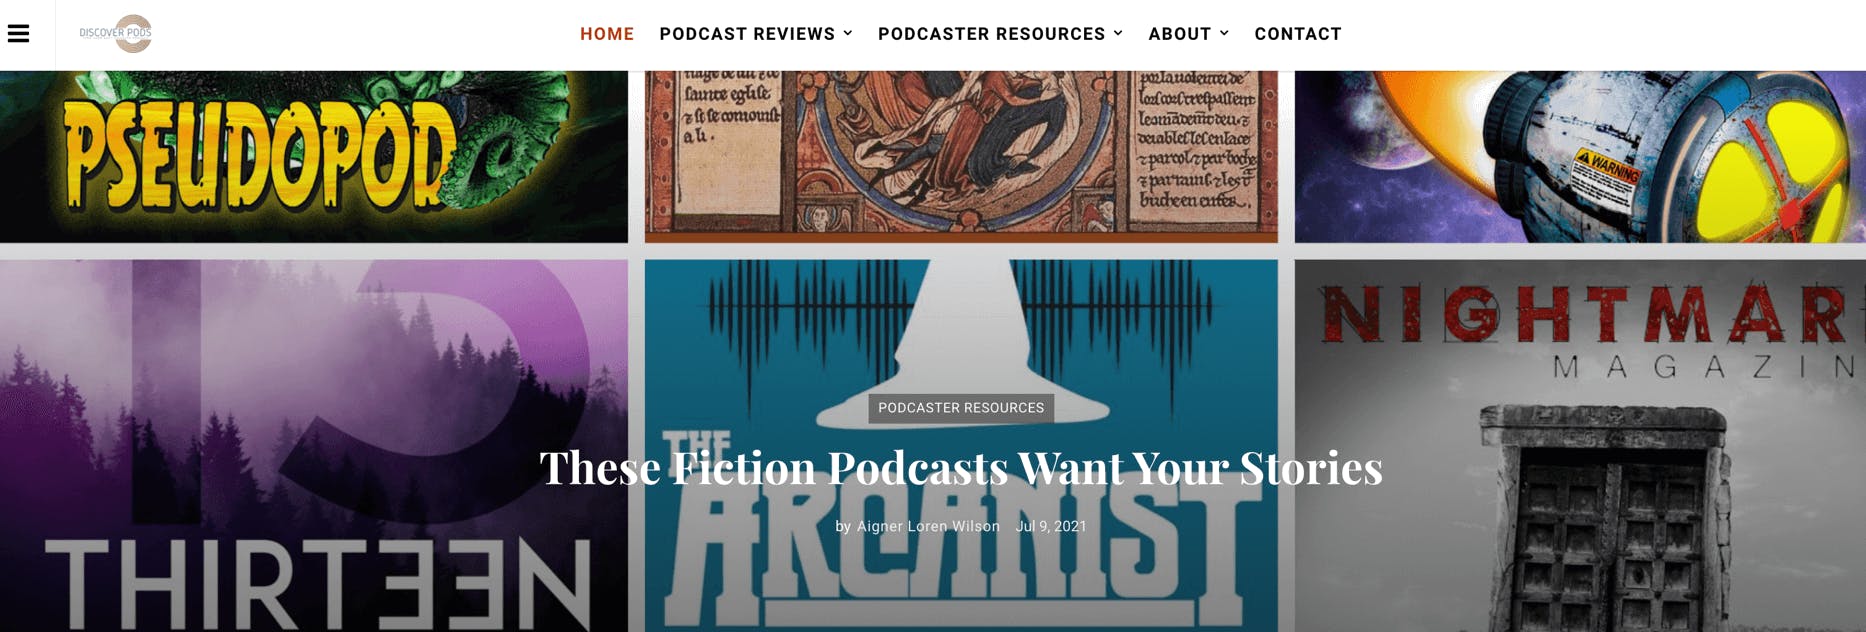 Discover Pods homepage with grid of various podcast cover art